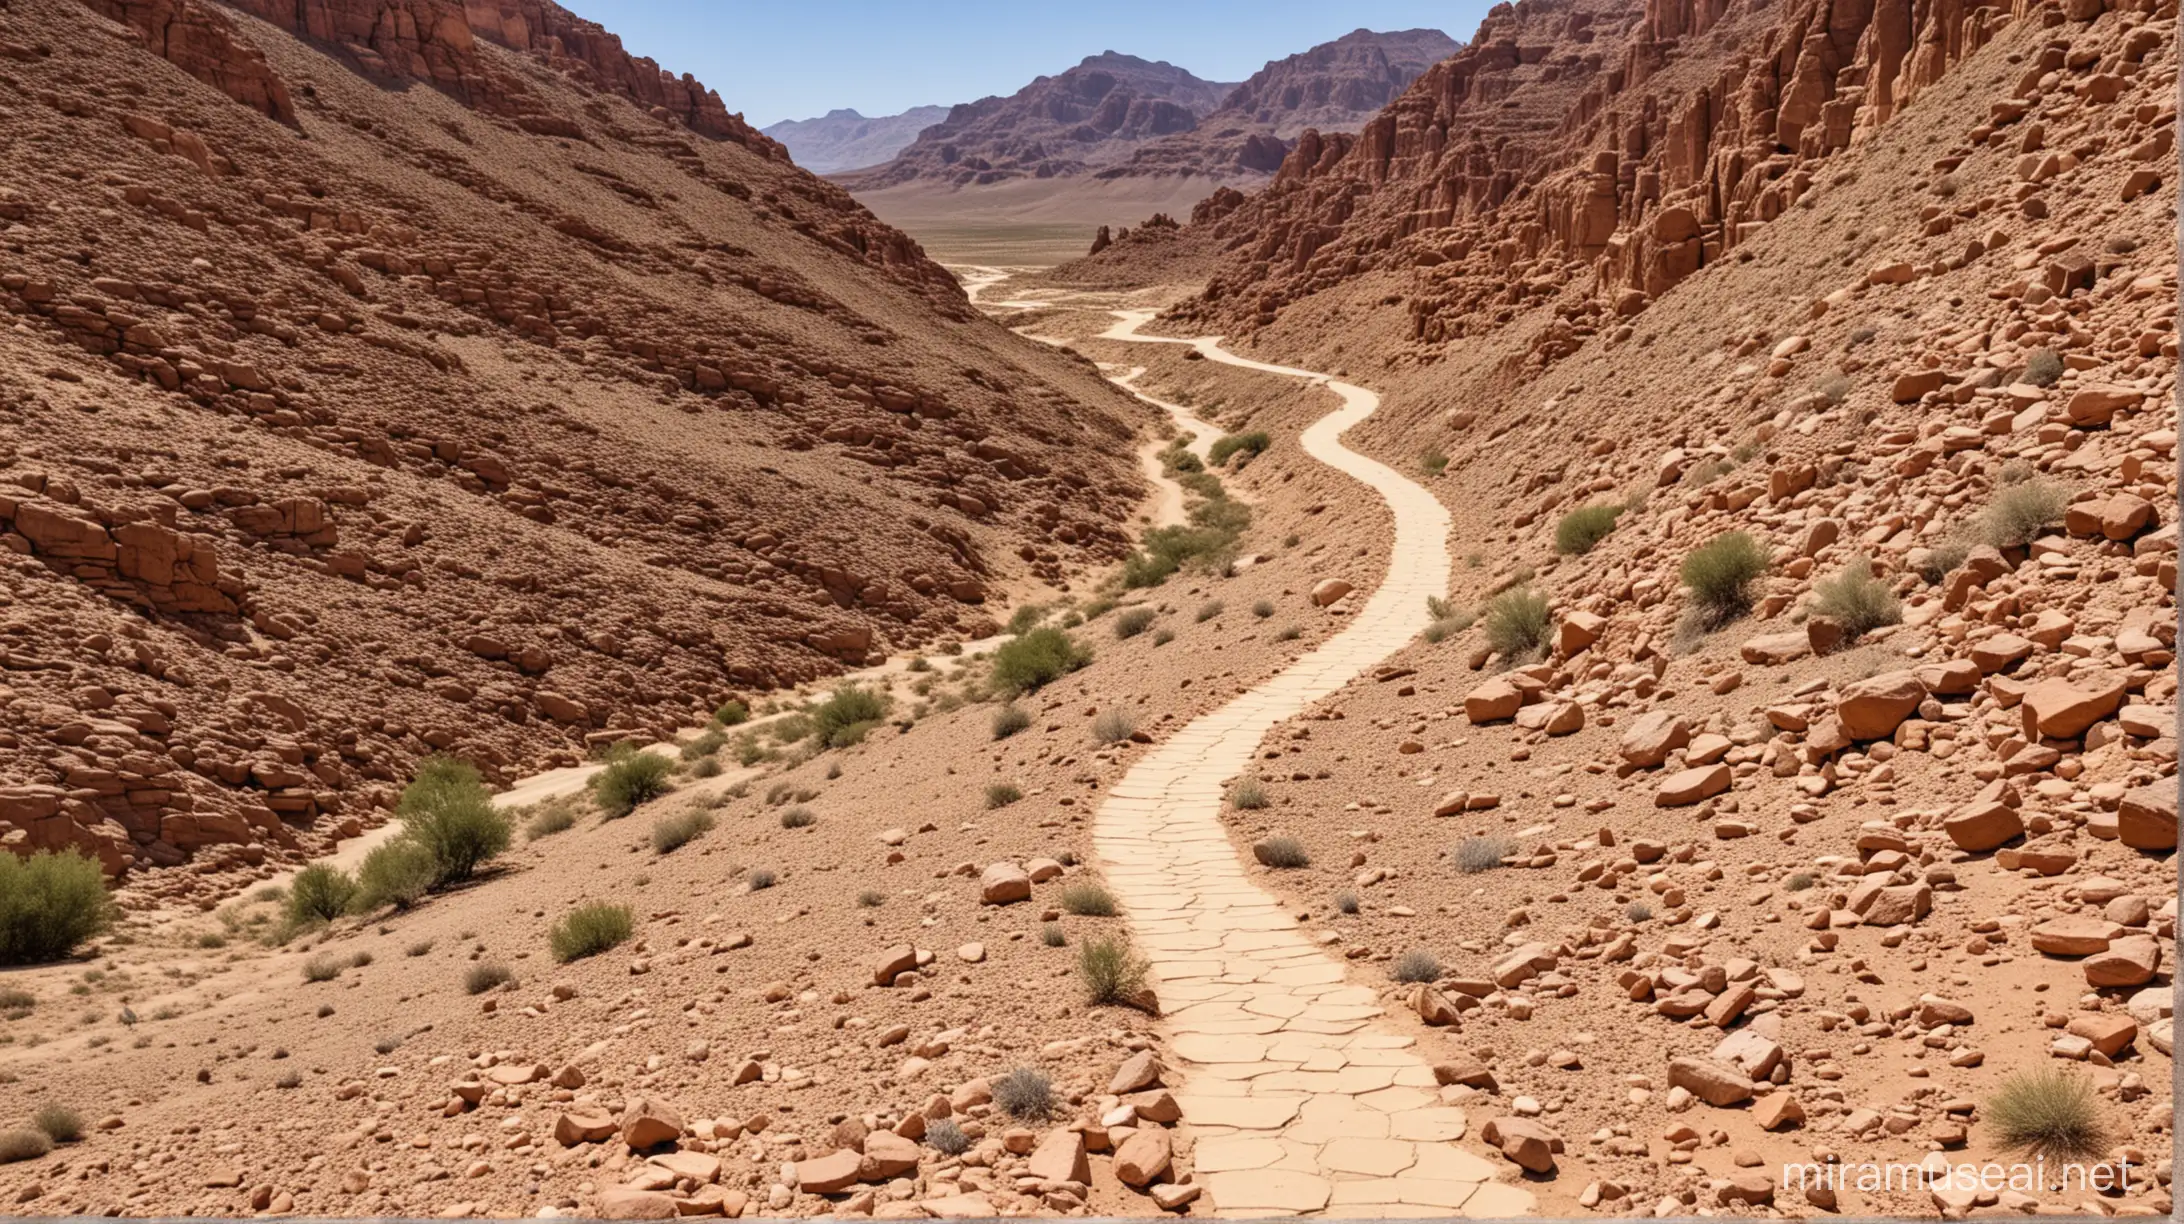 A narrow winding path in the desert